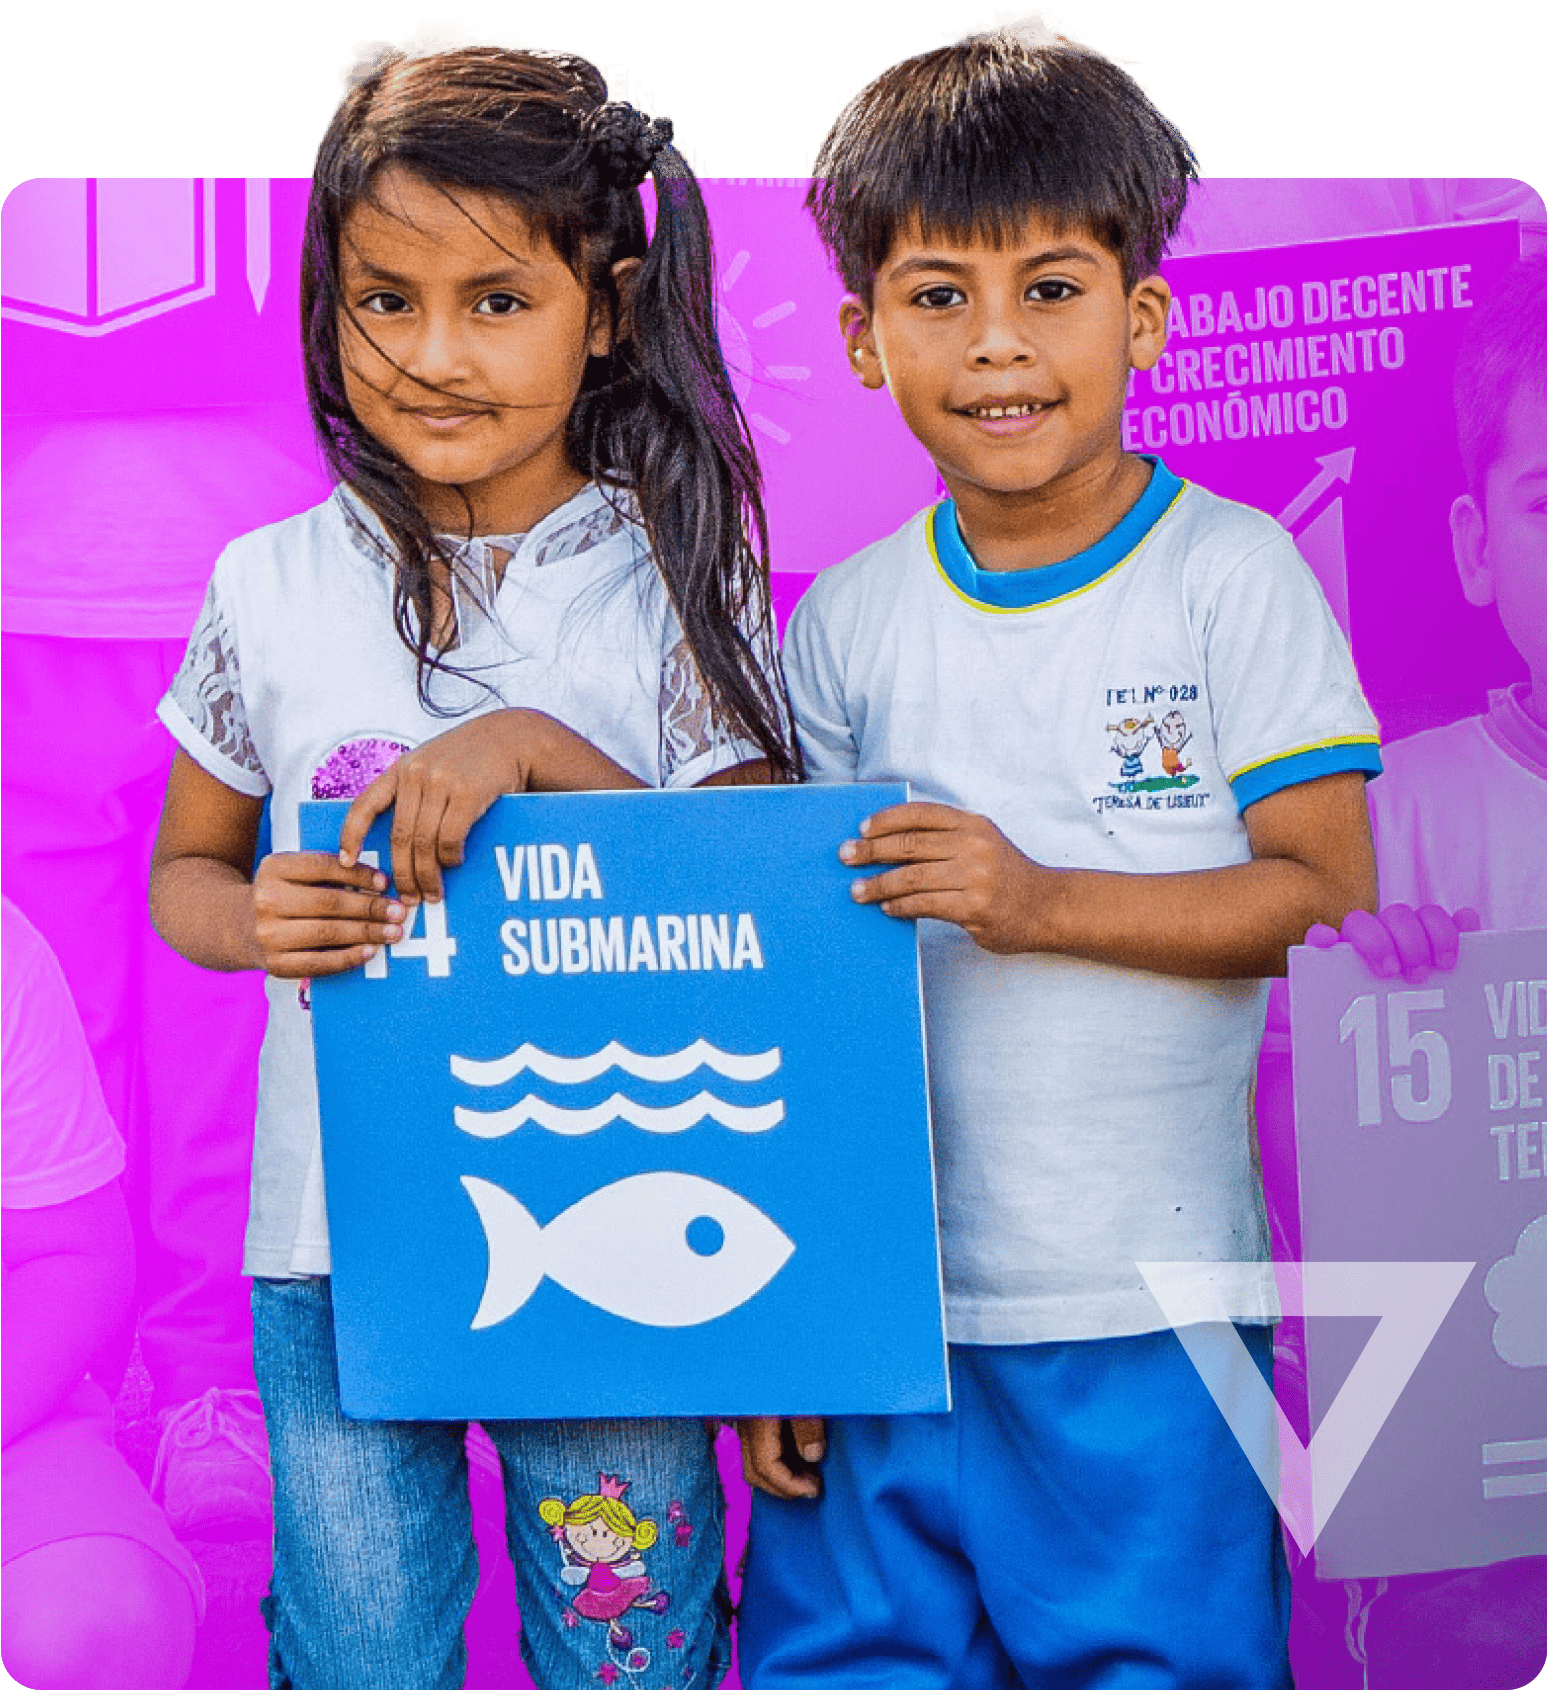 a girl and a boy holding up a sign for SDG 14 life below water